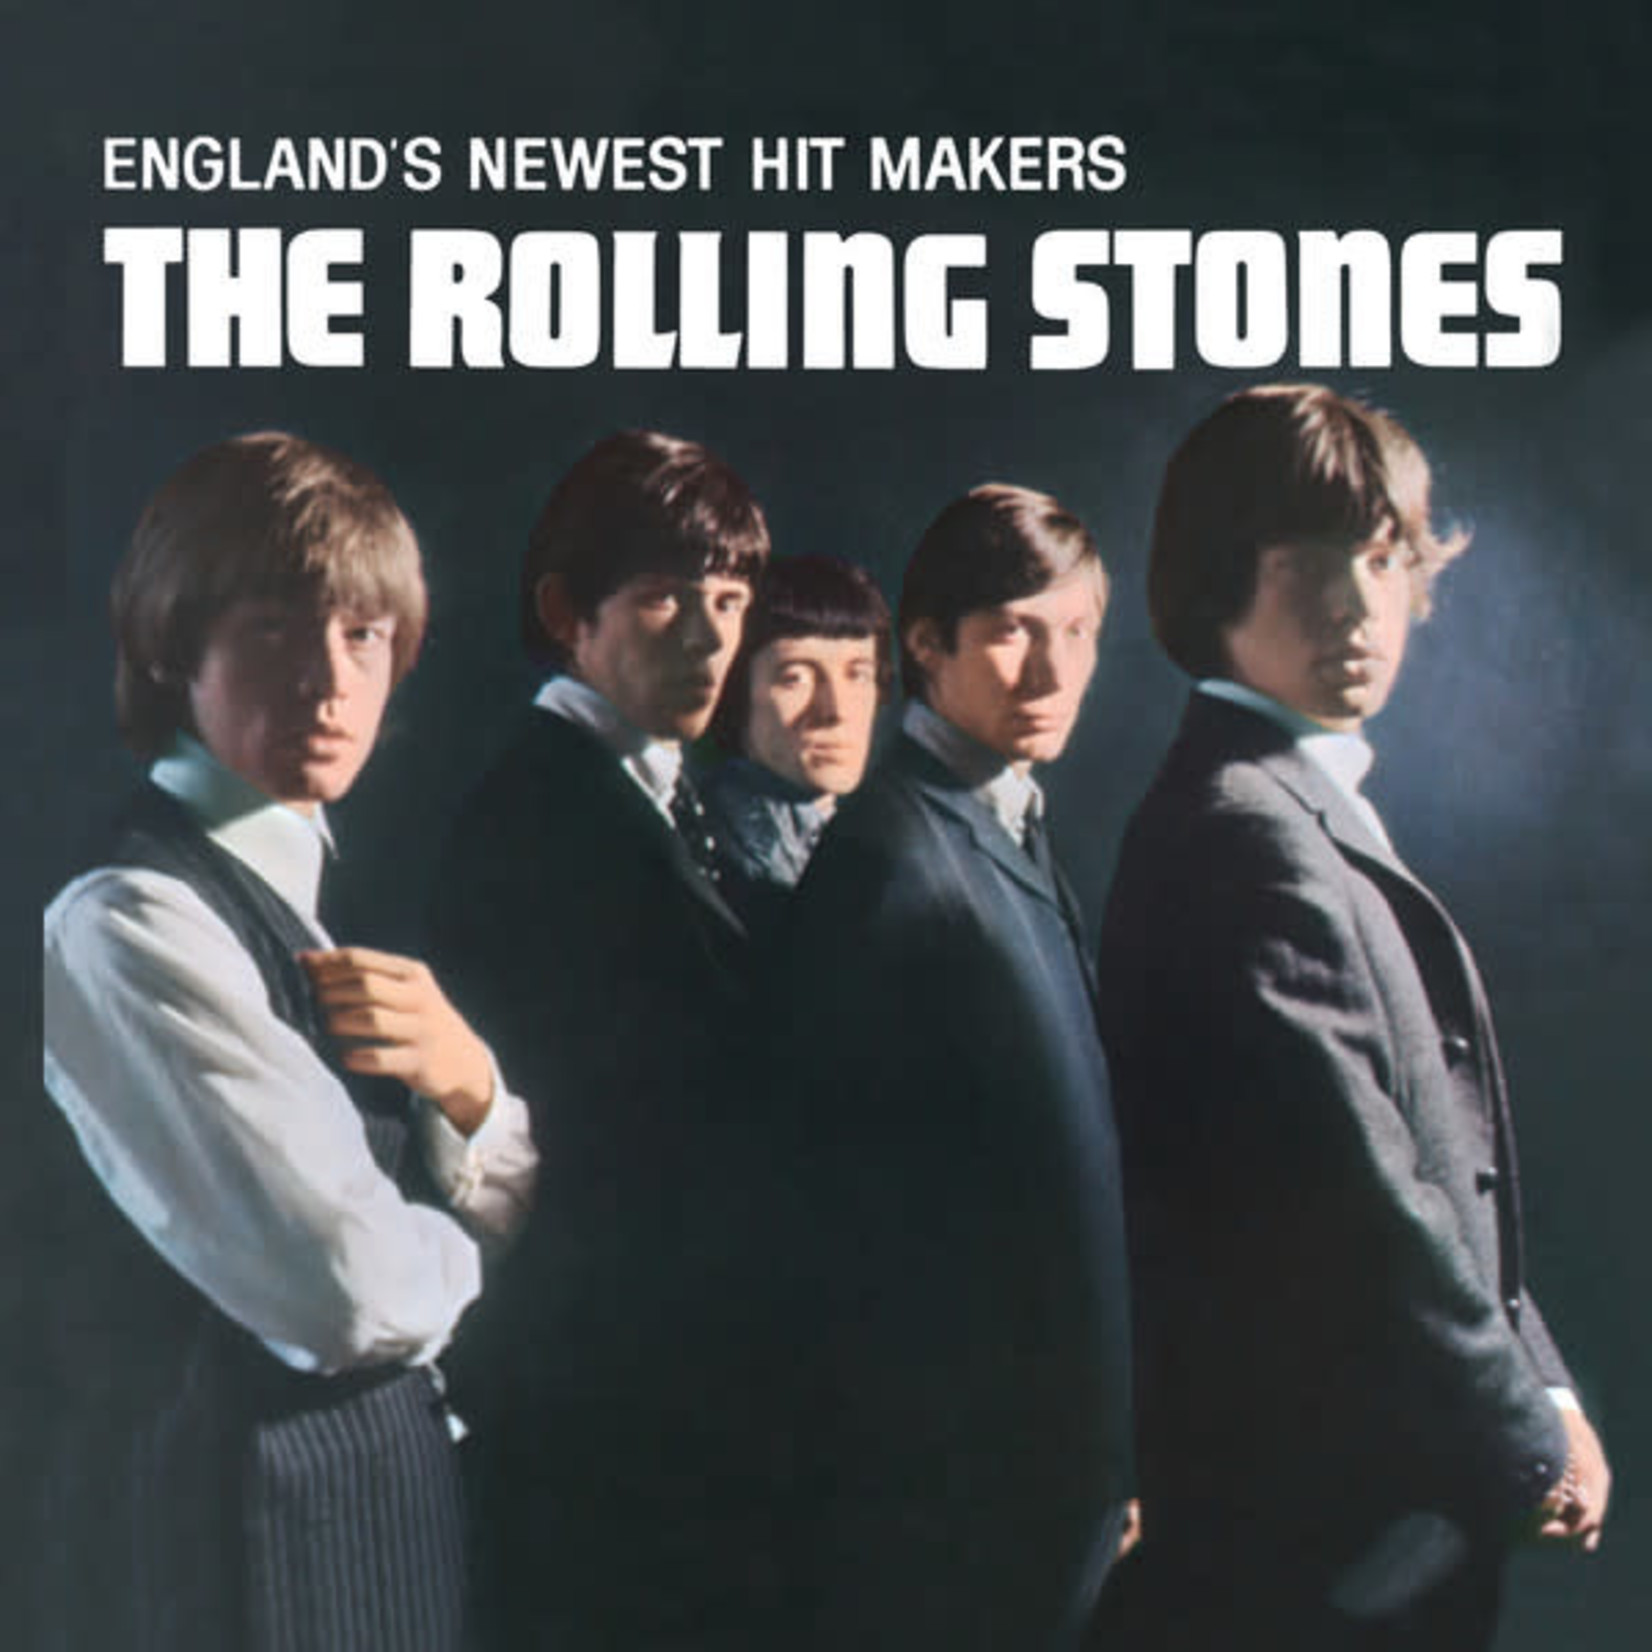 [12"] Rolling Stones - self-titled  - England's Newest Hit Makers